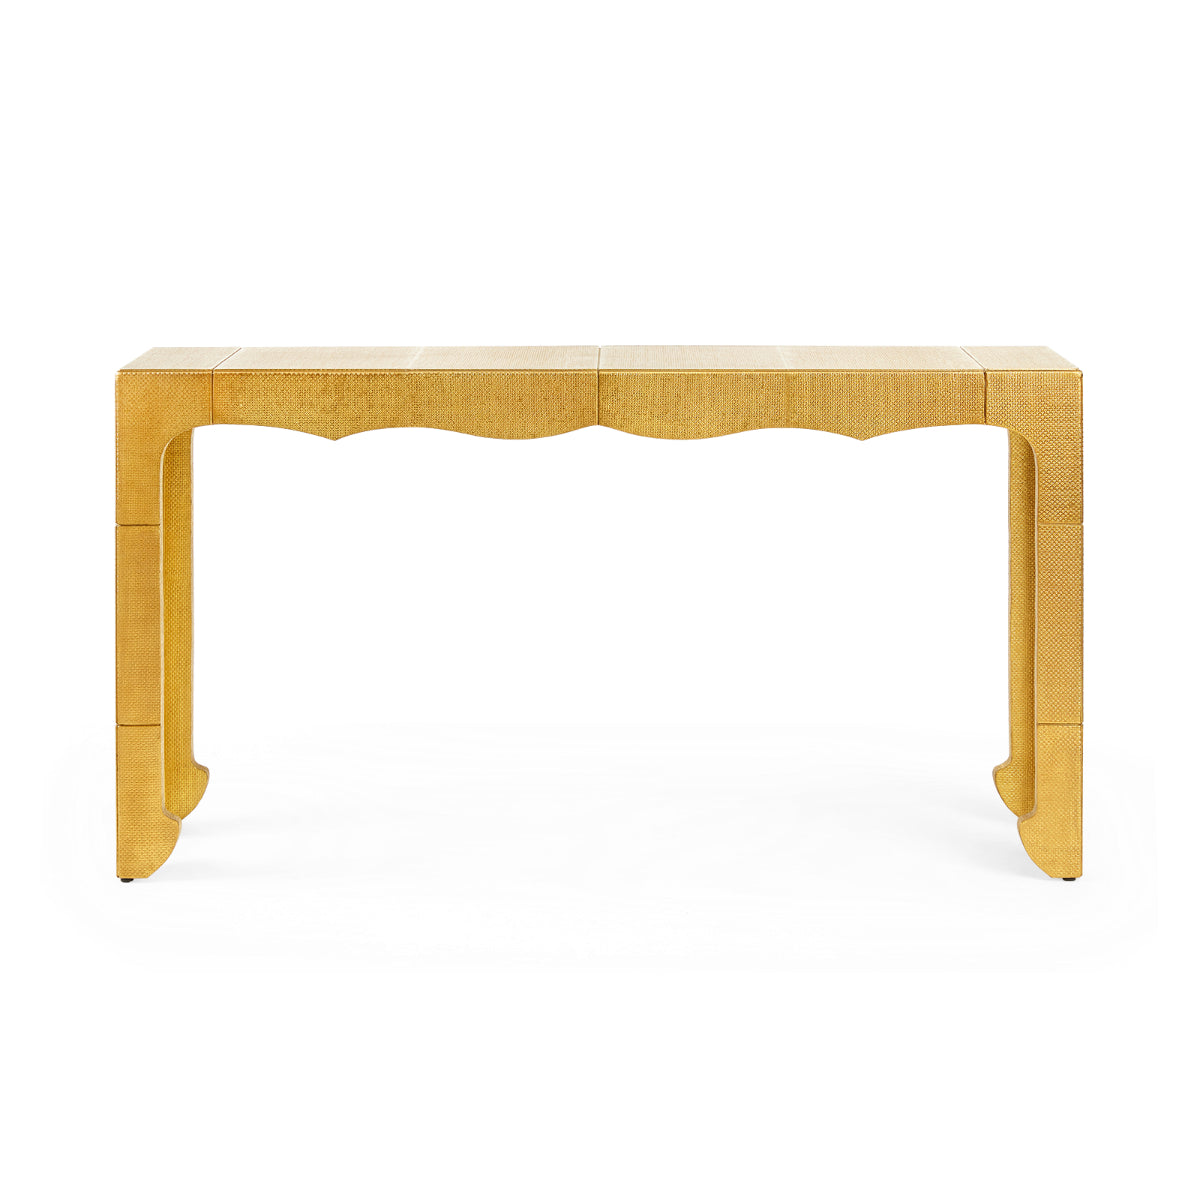 Jaques Console Table, Antique Brass Table Bungalow 5     Four Hands, Burke Decor, Mid Century Modern Furniture, Old Bones Furniture Company, Old Bones Co, Modern Mid Century, Designer Furniture, https://www.oldbonesco.com/